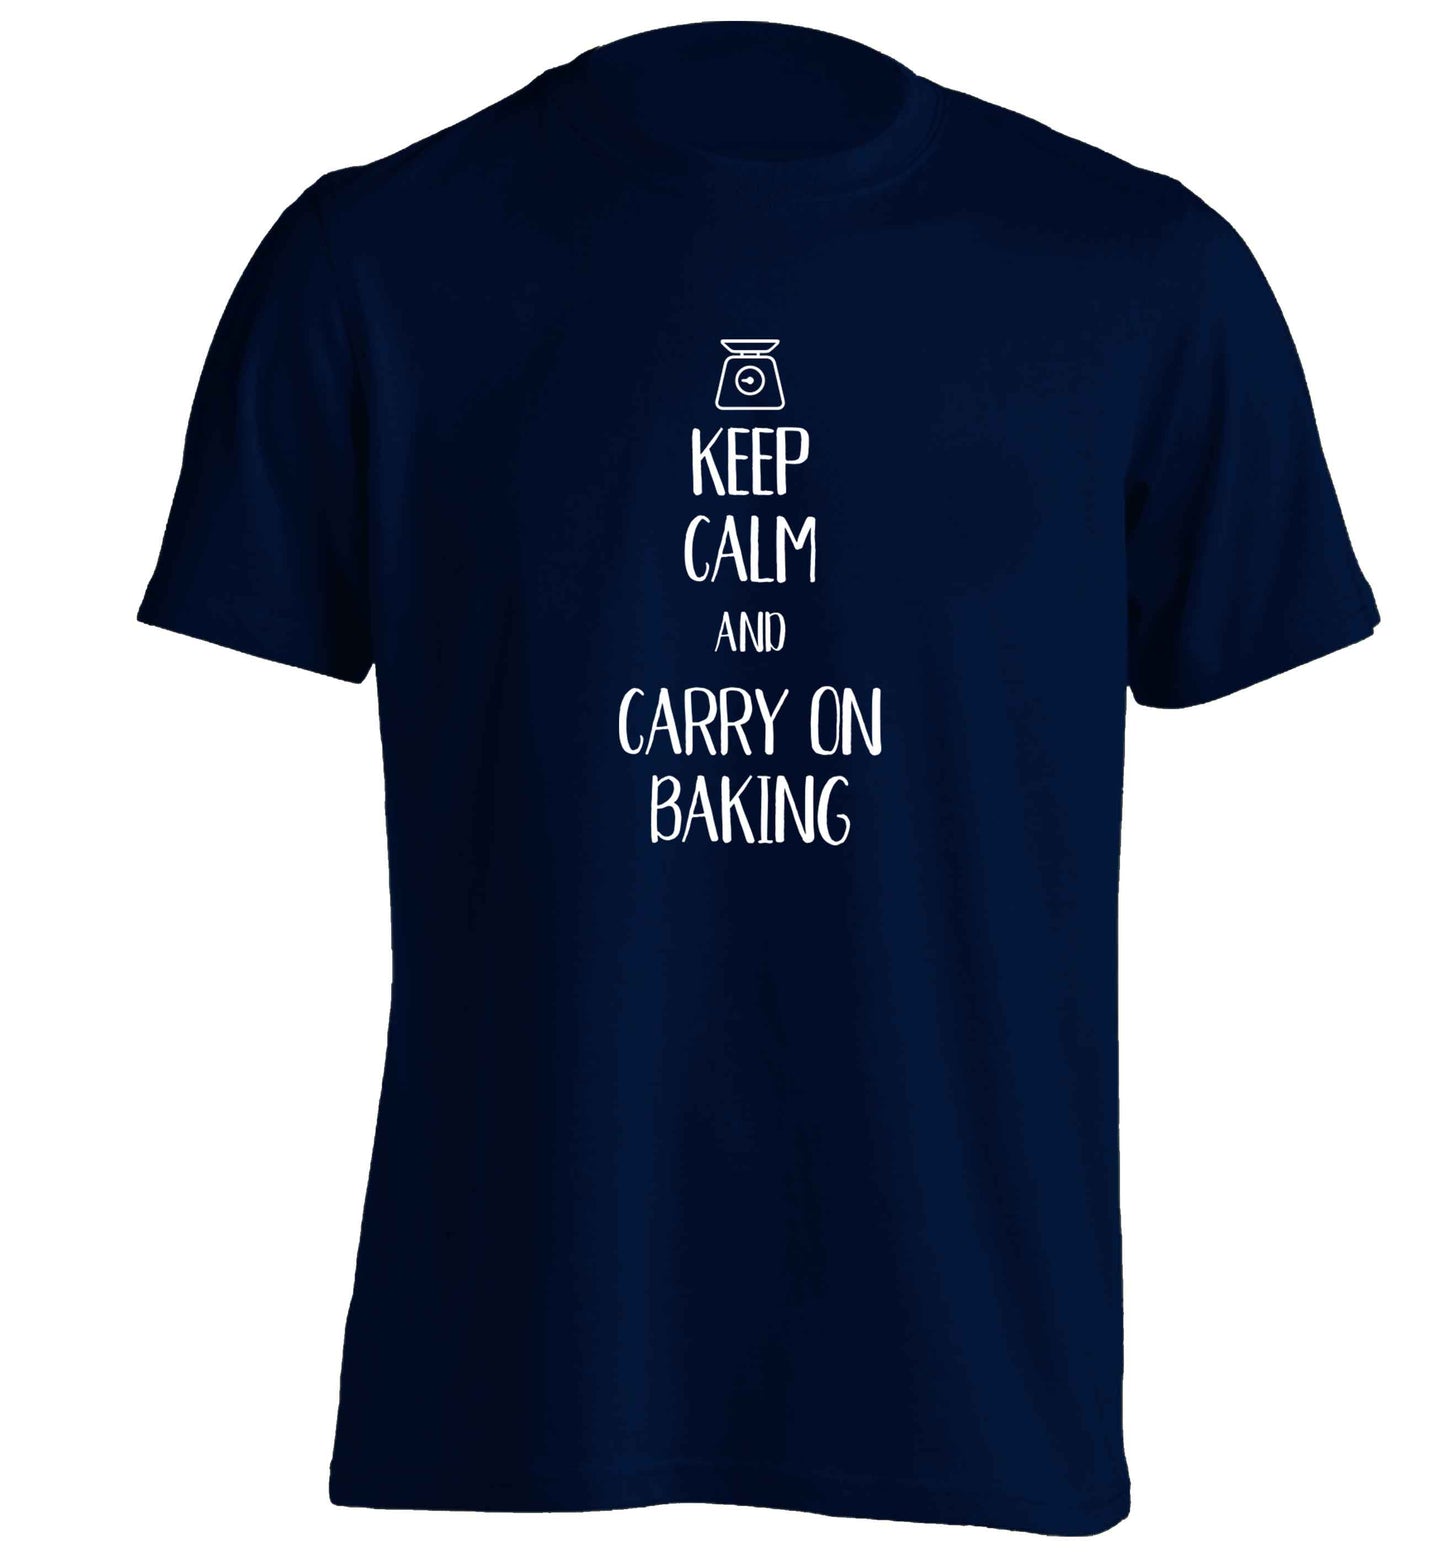 Keep calm and carry on baking adults unisex navy Tshirt 2XL